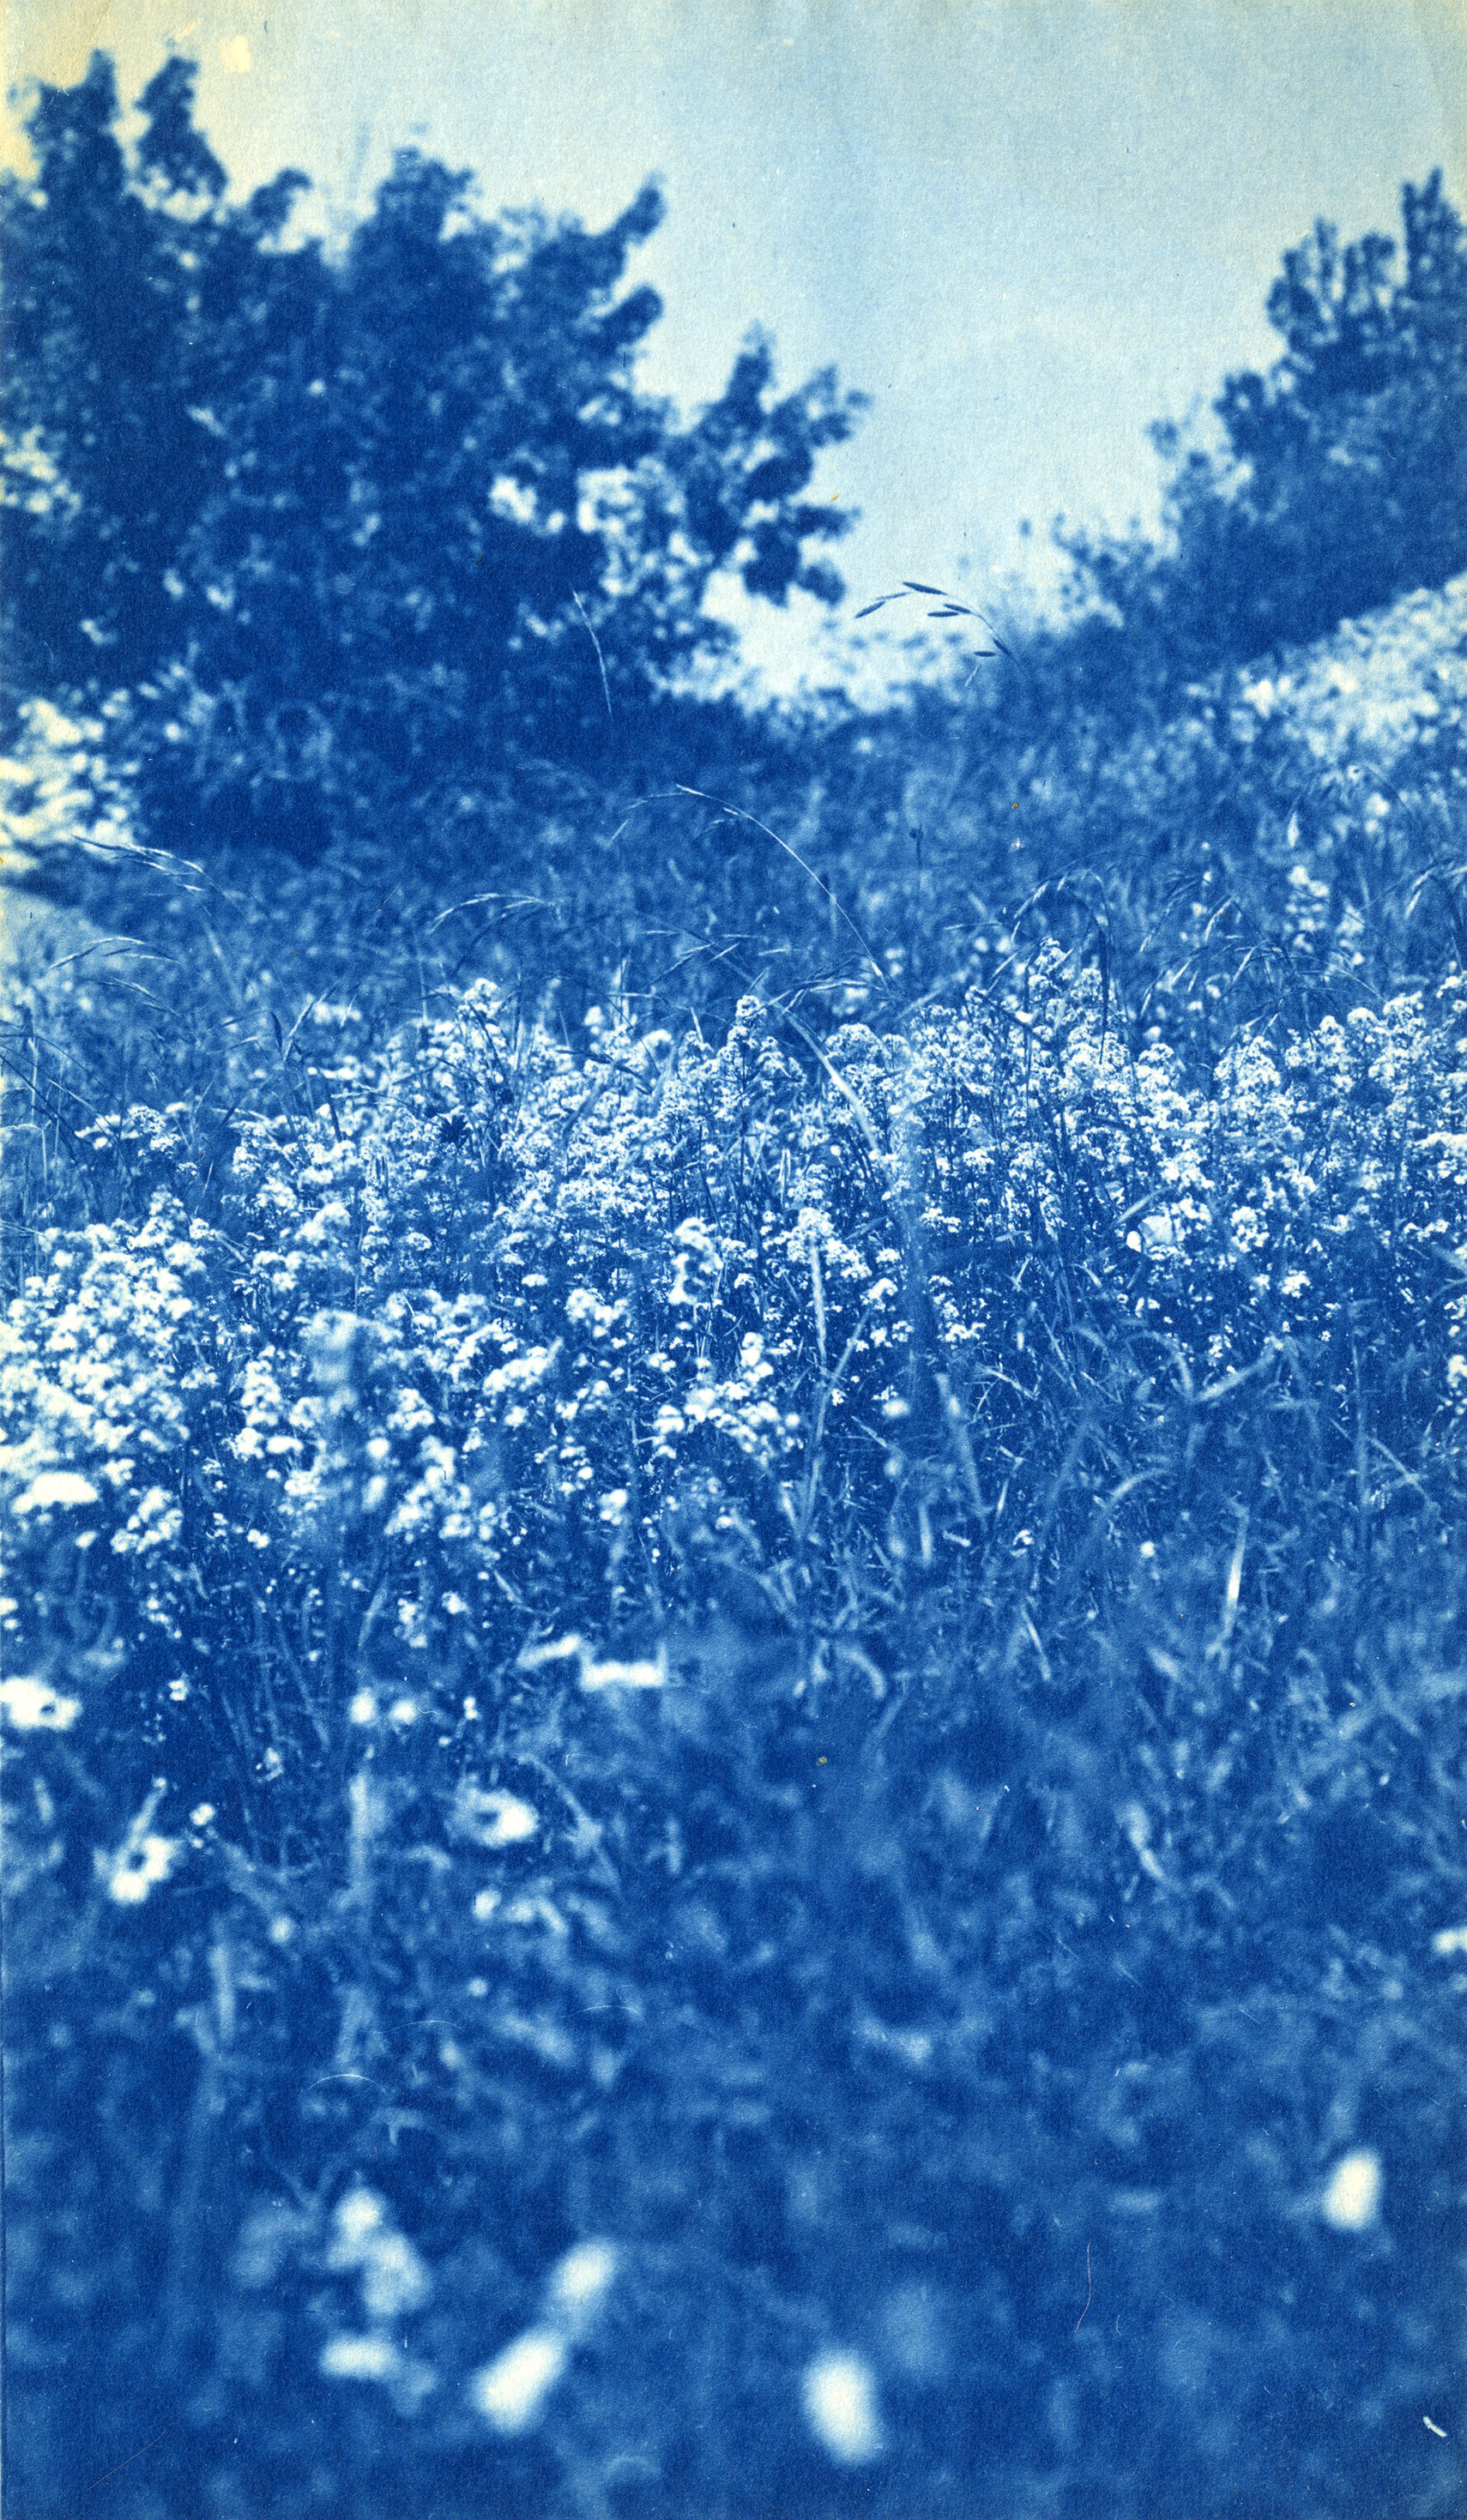 Cyanotypes: The origins of photography